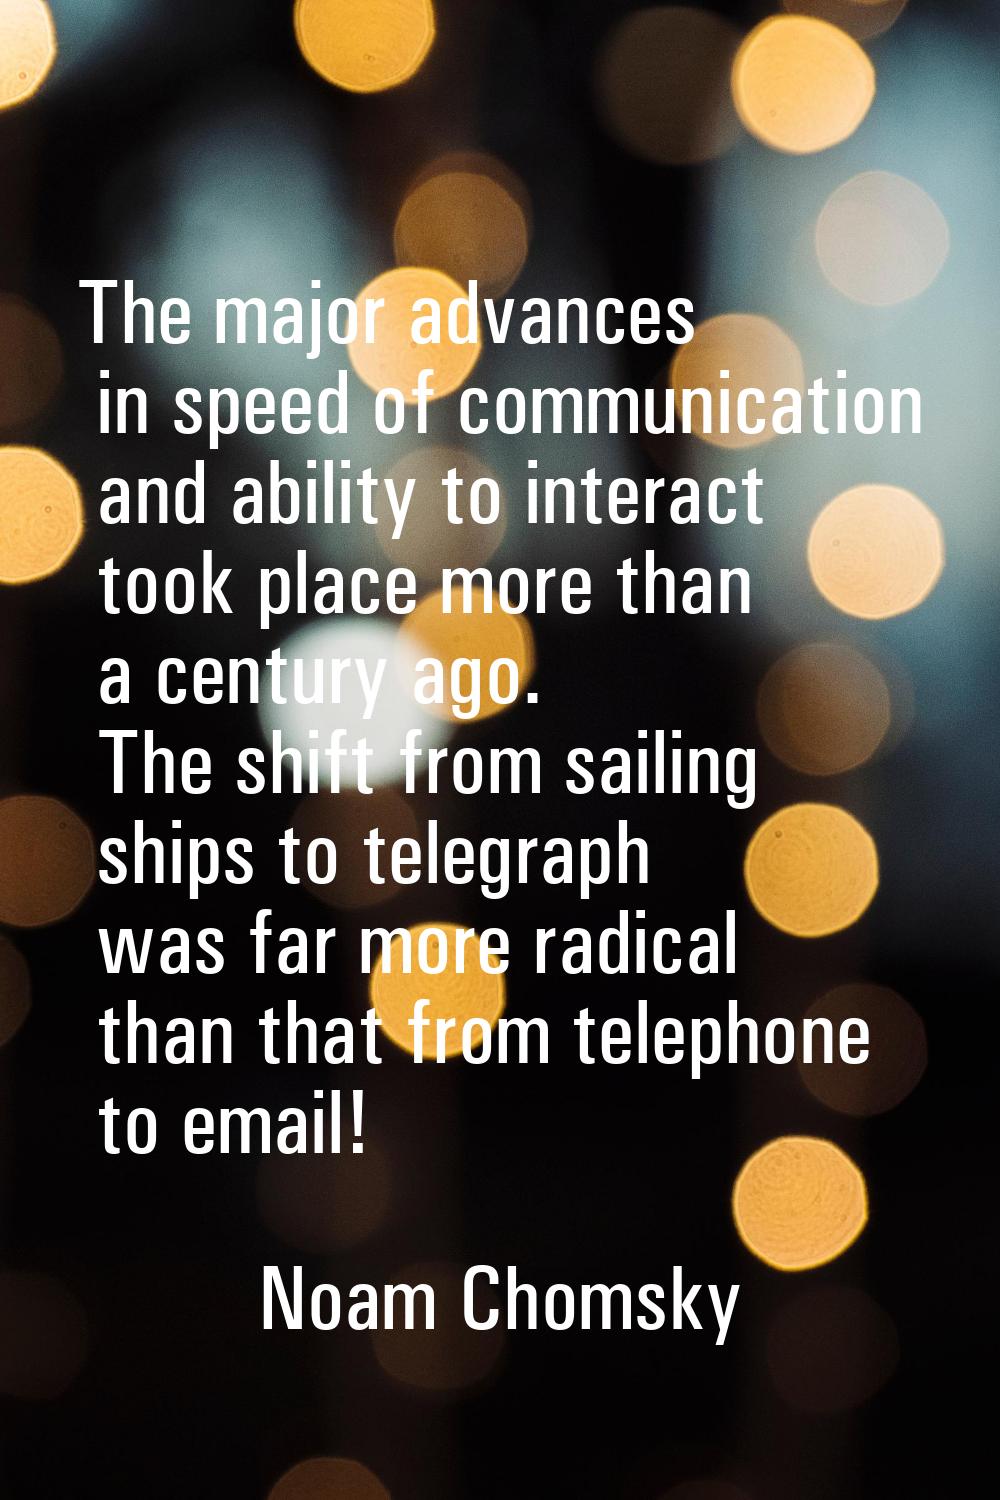 The major advances in speed of communication and ability to interact took place more than a century